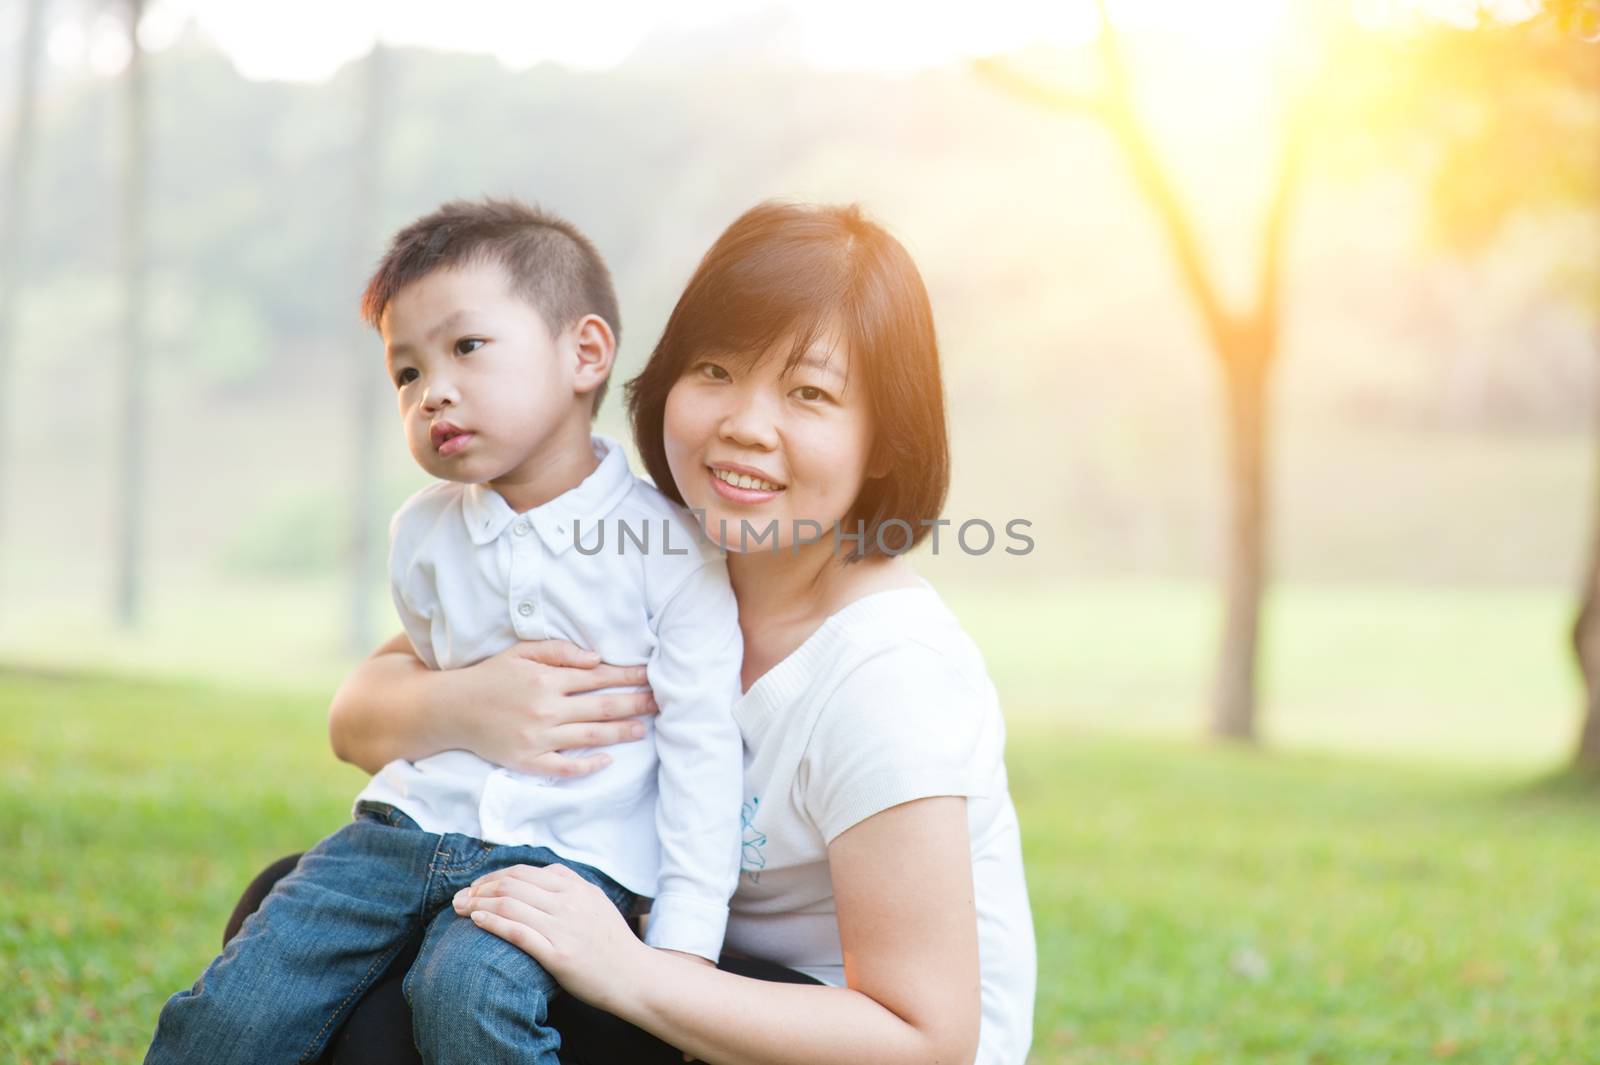 Mother hugging son in the park, Asian family outdoor lifestyle, morning with sun flare.